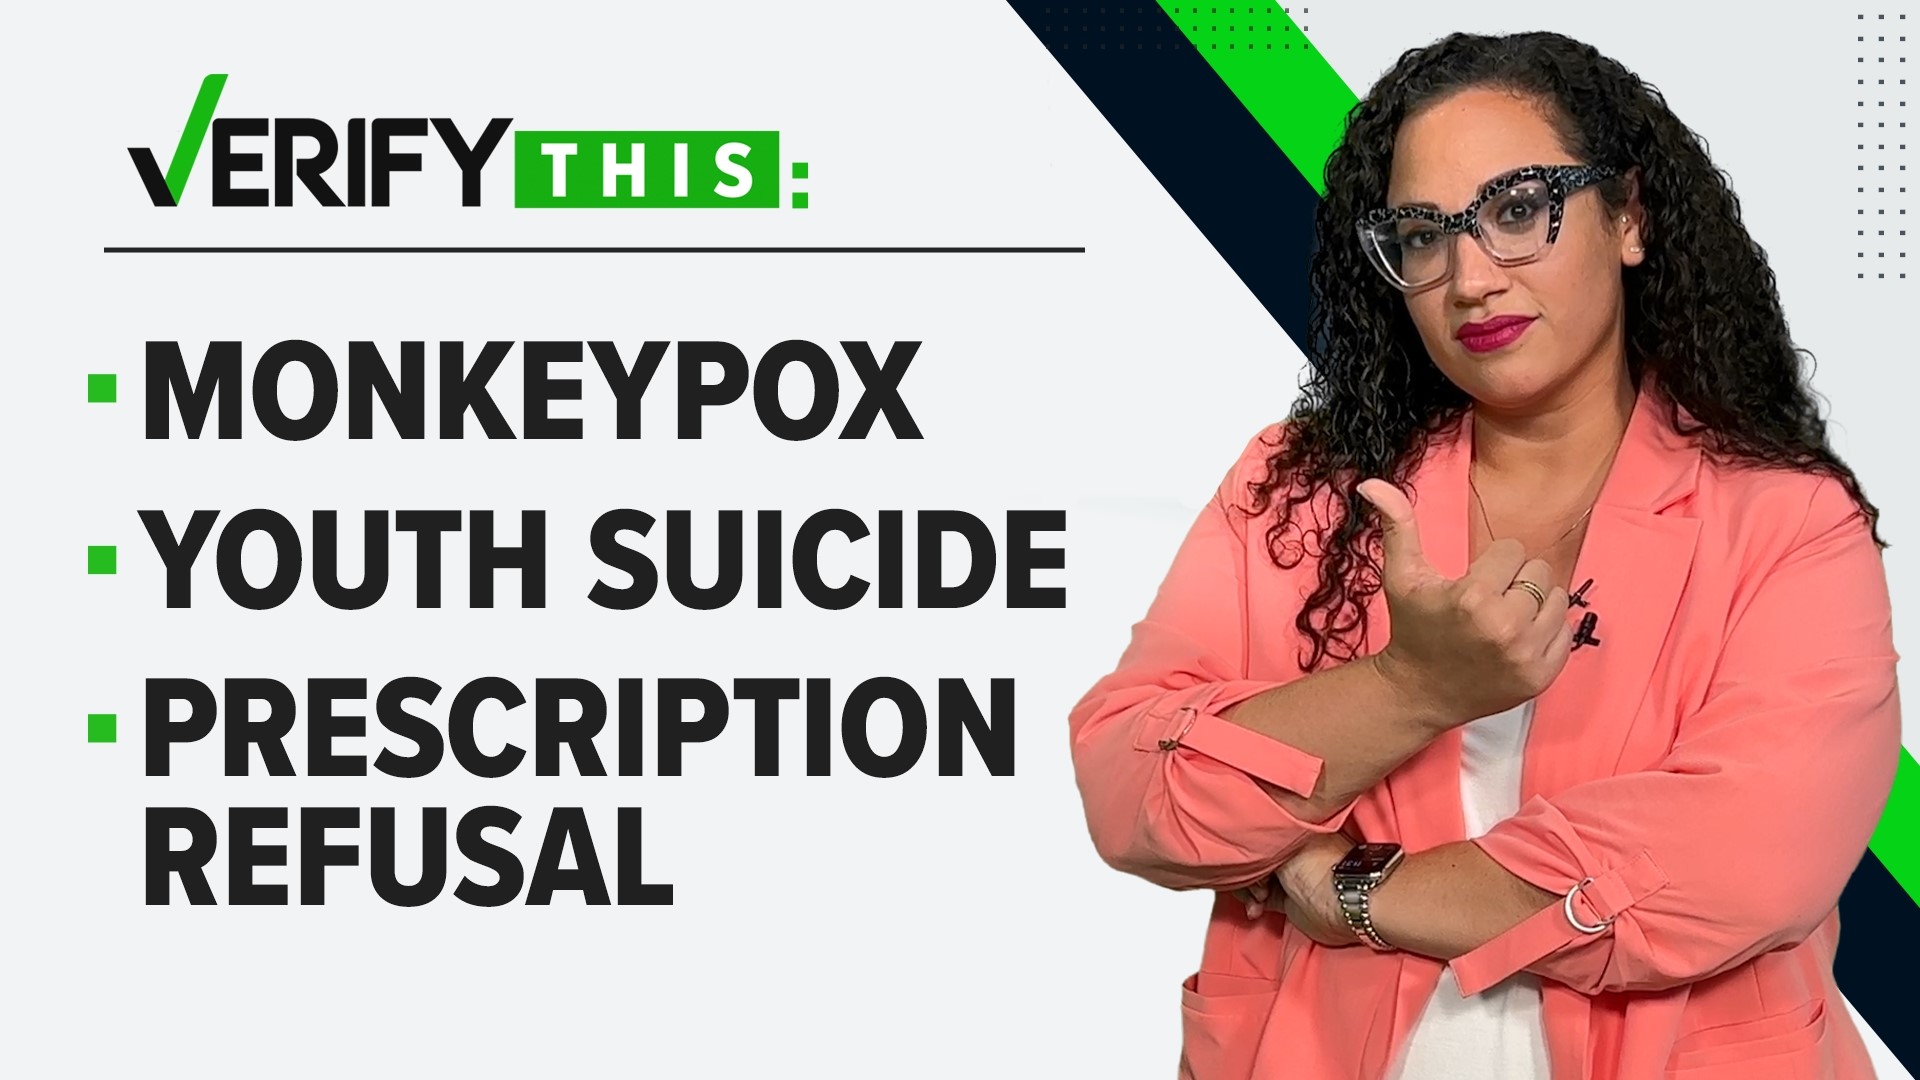 Finding answers to your questions including if monkeypox is a pandemic and if pharmacists can refuse to fill a prescription. Plus a look at the rise in youth suicide